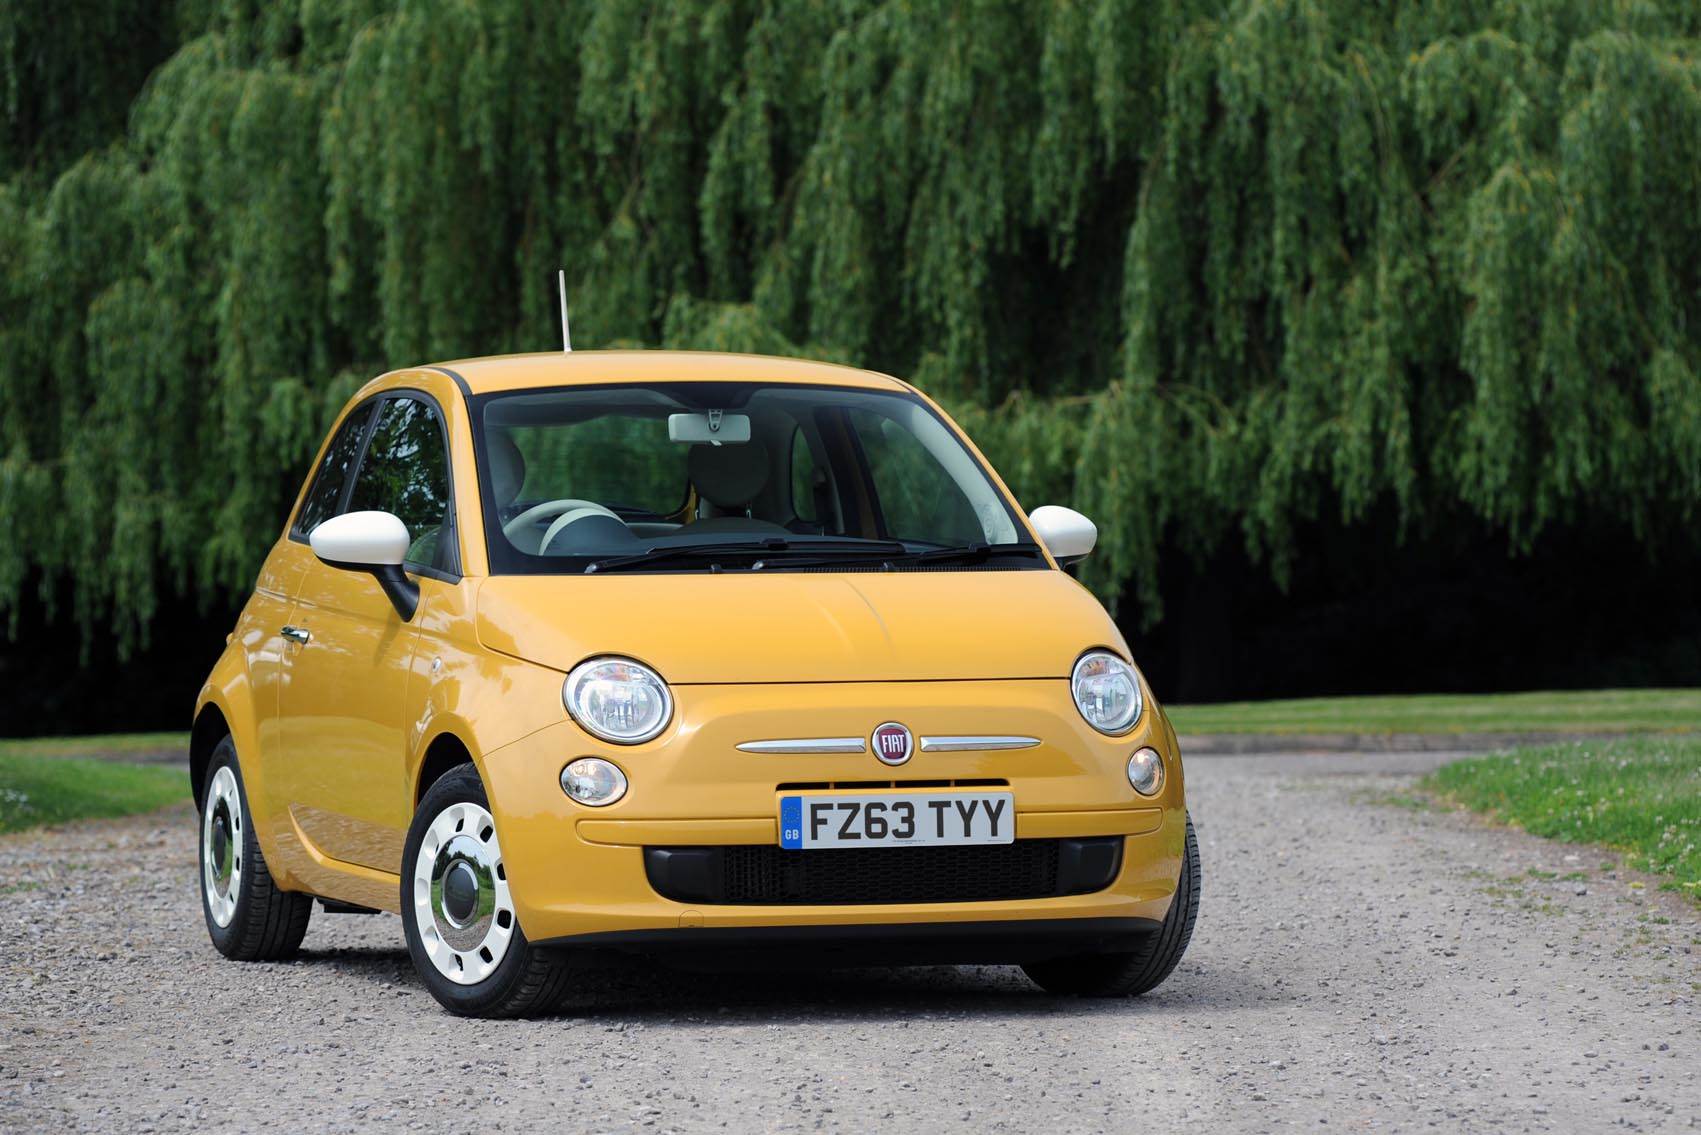 vw-s-nsf-platform-could-have-been-used-for-the-next-generation-fiat-500-family